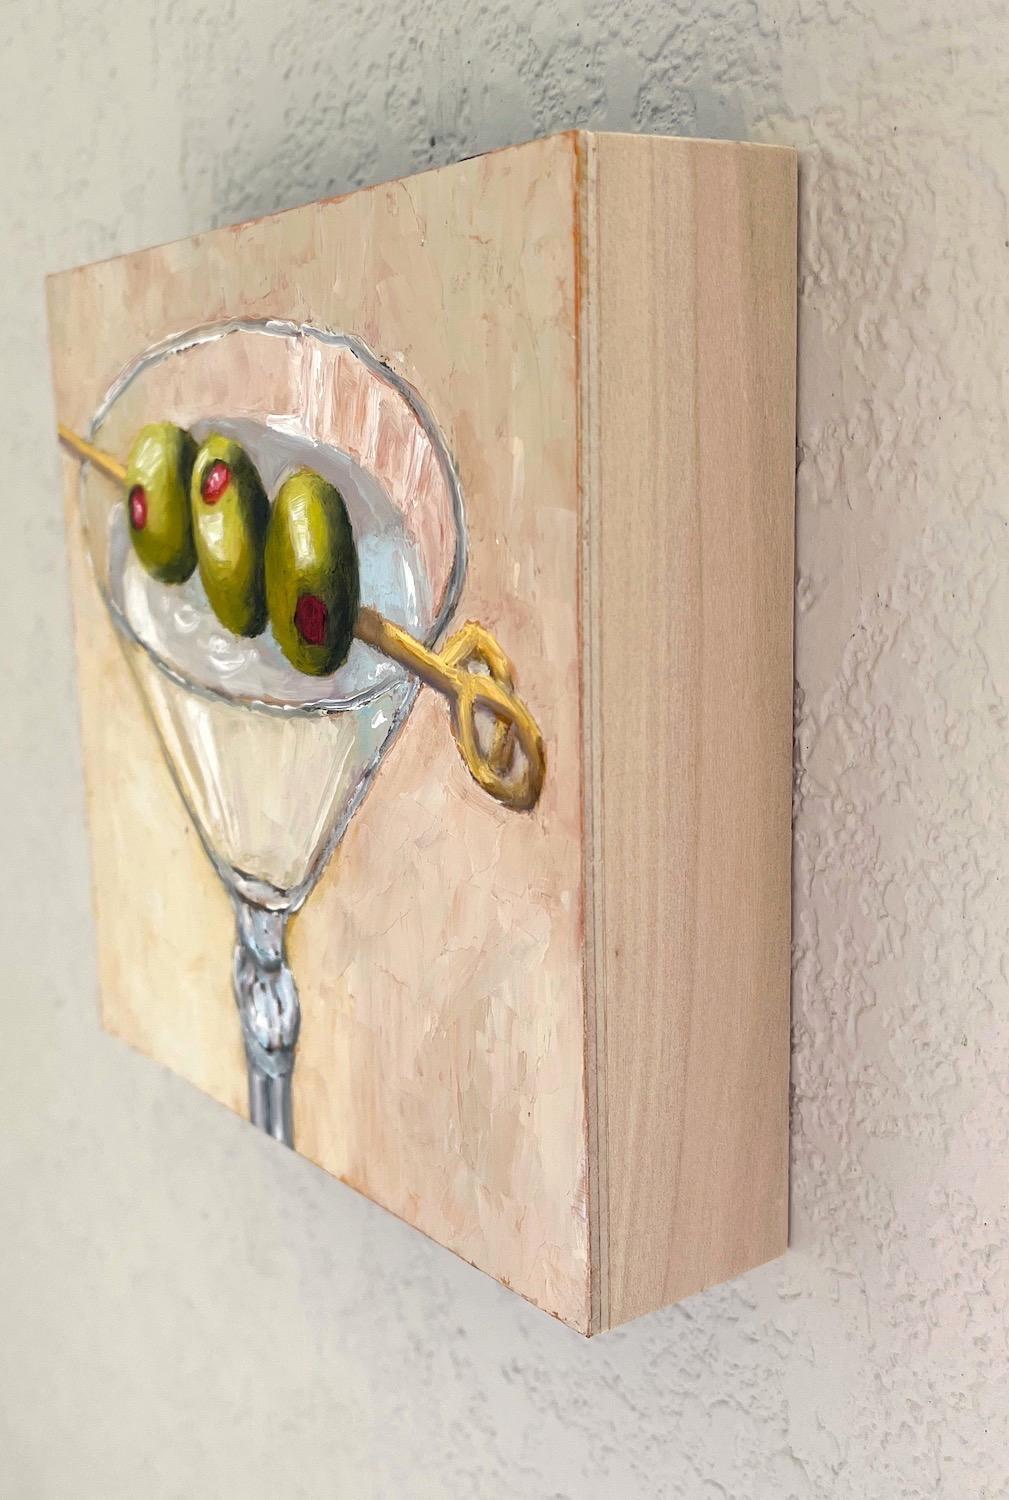 <p>Artist Comments<br>A sophisticated martini stands against a neutral background. Vivid green olives on a skewer rest on the rim of a sleek glass and add a pop of color to the concoction. The artwork emphasizes a harmonious composition while